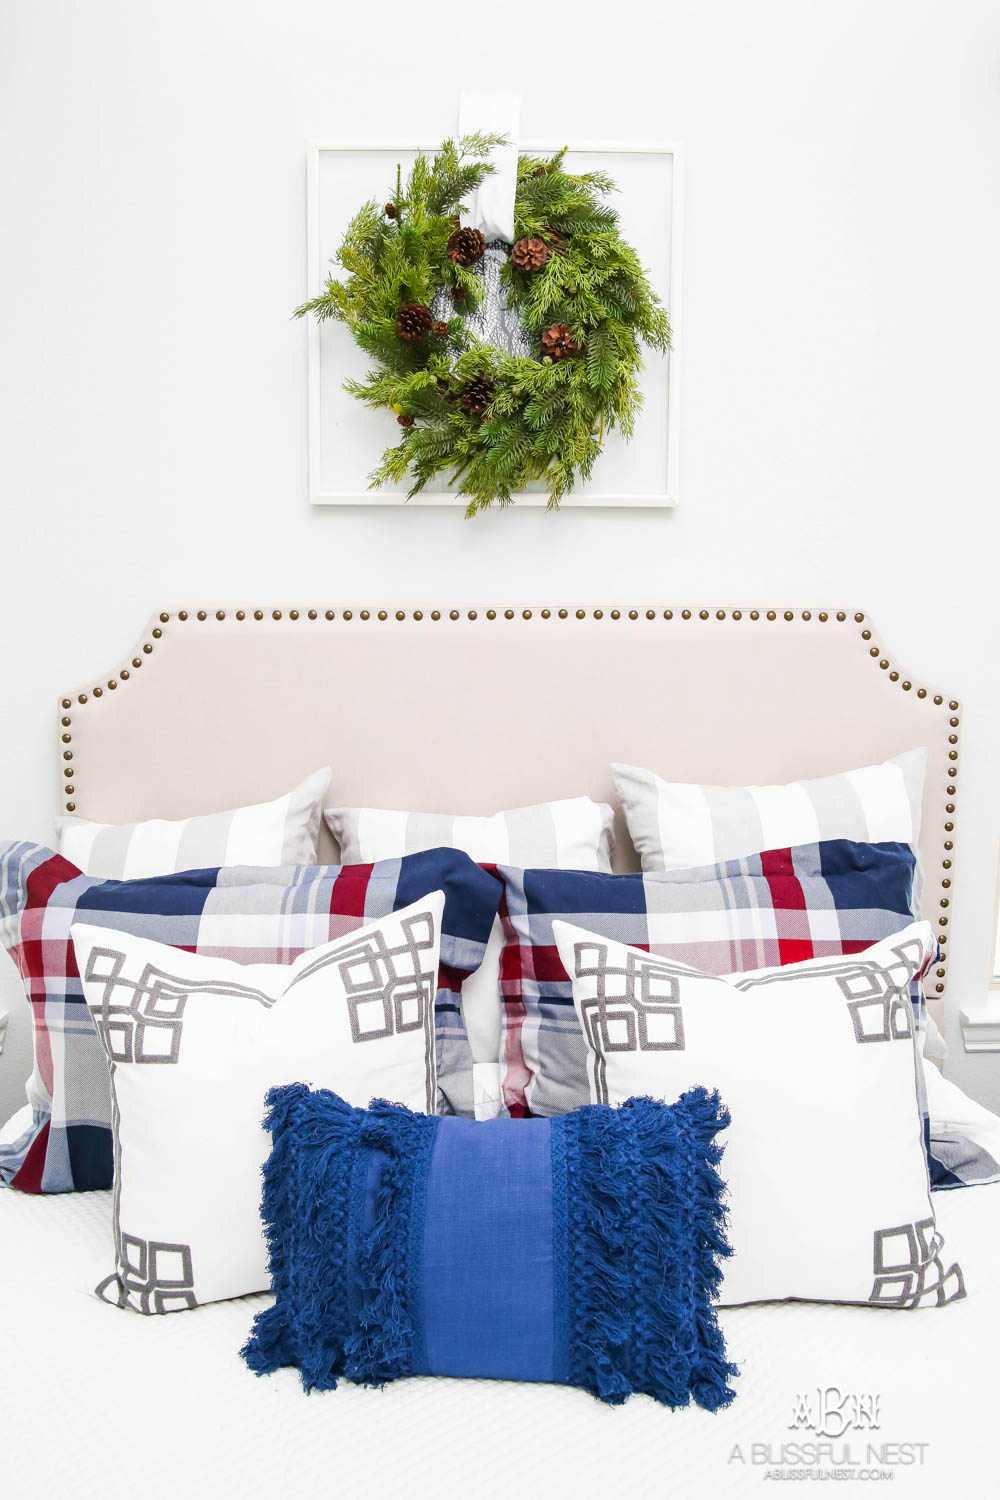 Jazz up your guest bedroom with beautiful plaid bedding and cozy essentials from Kohl's! #ad #WinterBedding #KohlsFinds #guestbedroom #plaid